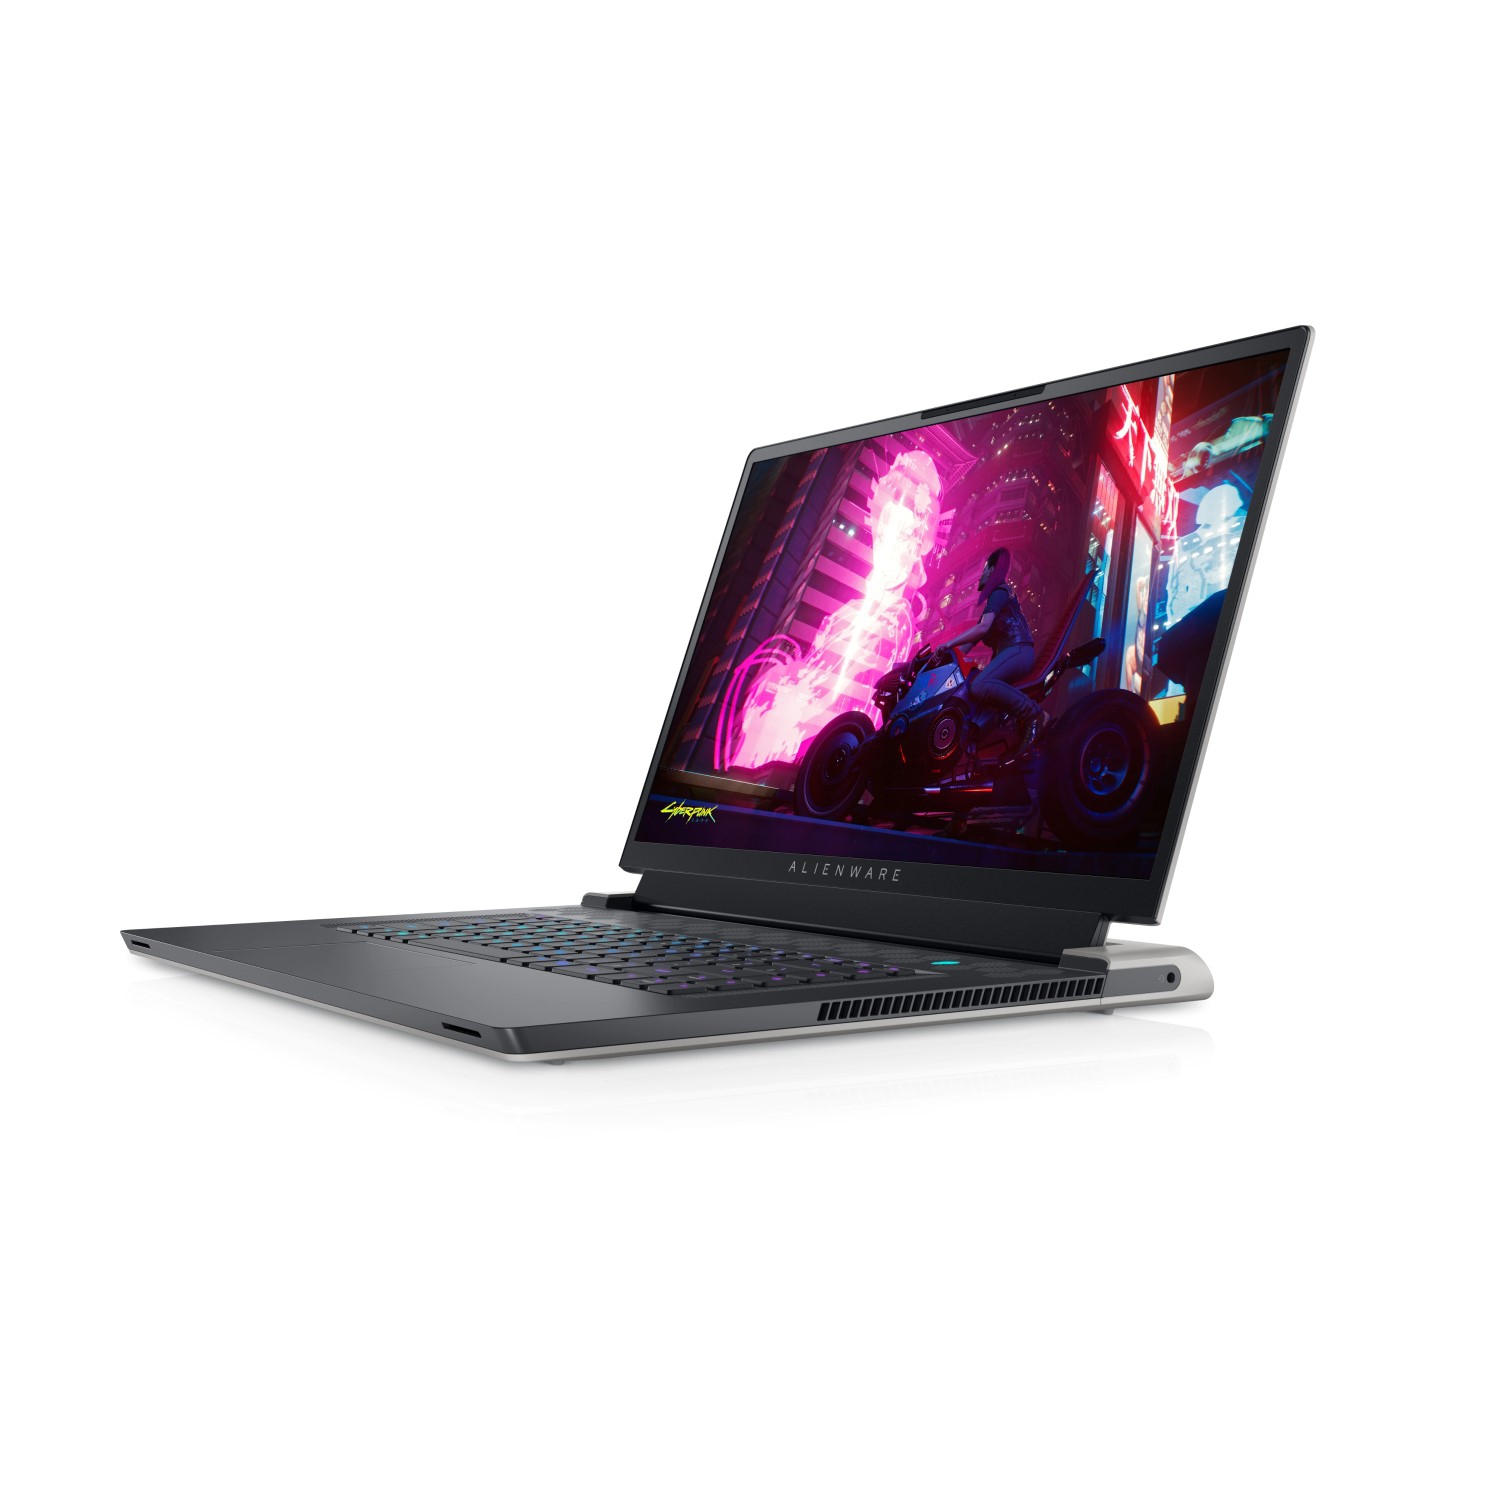 Refurbished (Excellent) - Alienware X17 R1, 17" FHD 360Hz, RTX 3080, i9-11980HK, 32GB RAM, 1TB SSD, WIN10 HOME, Certified Refurbished